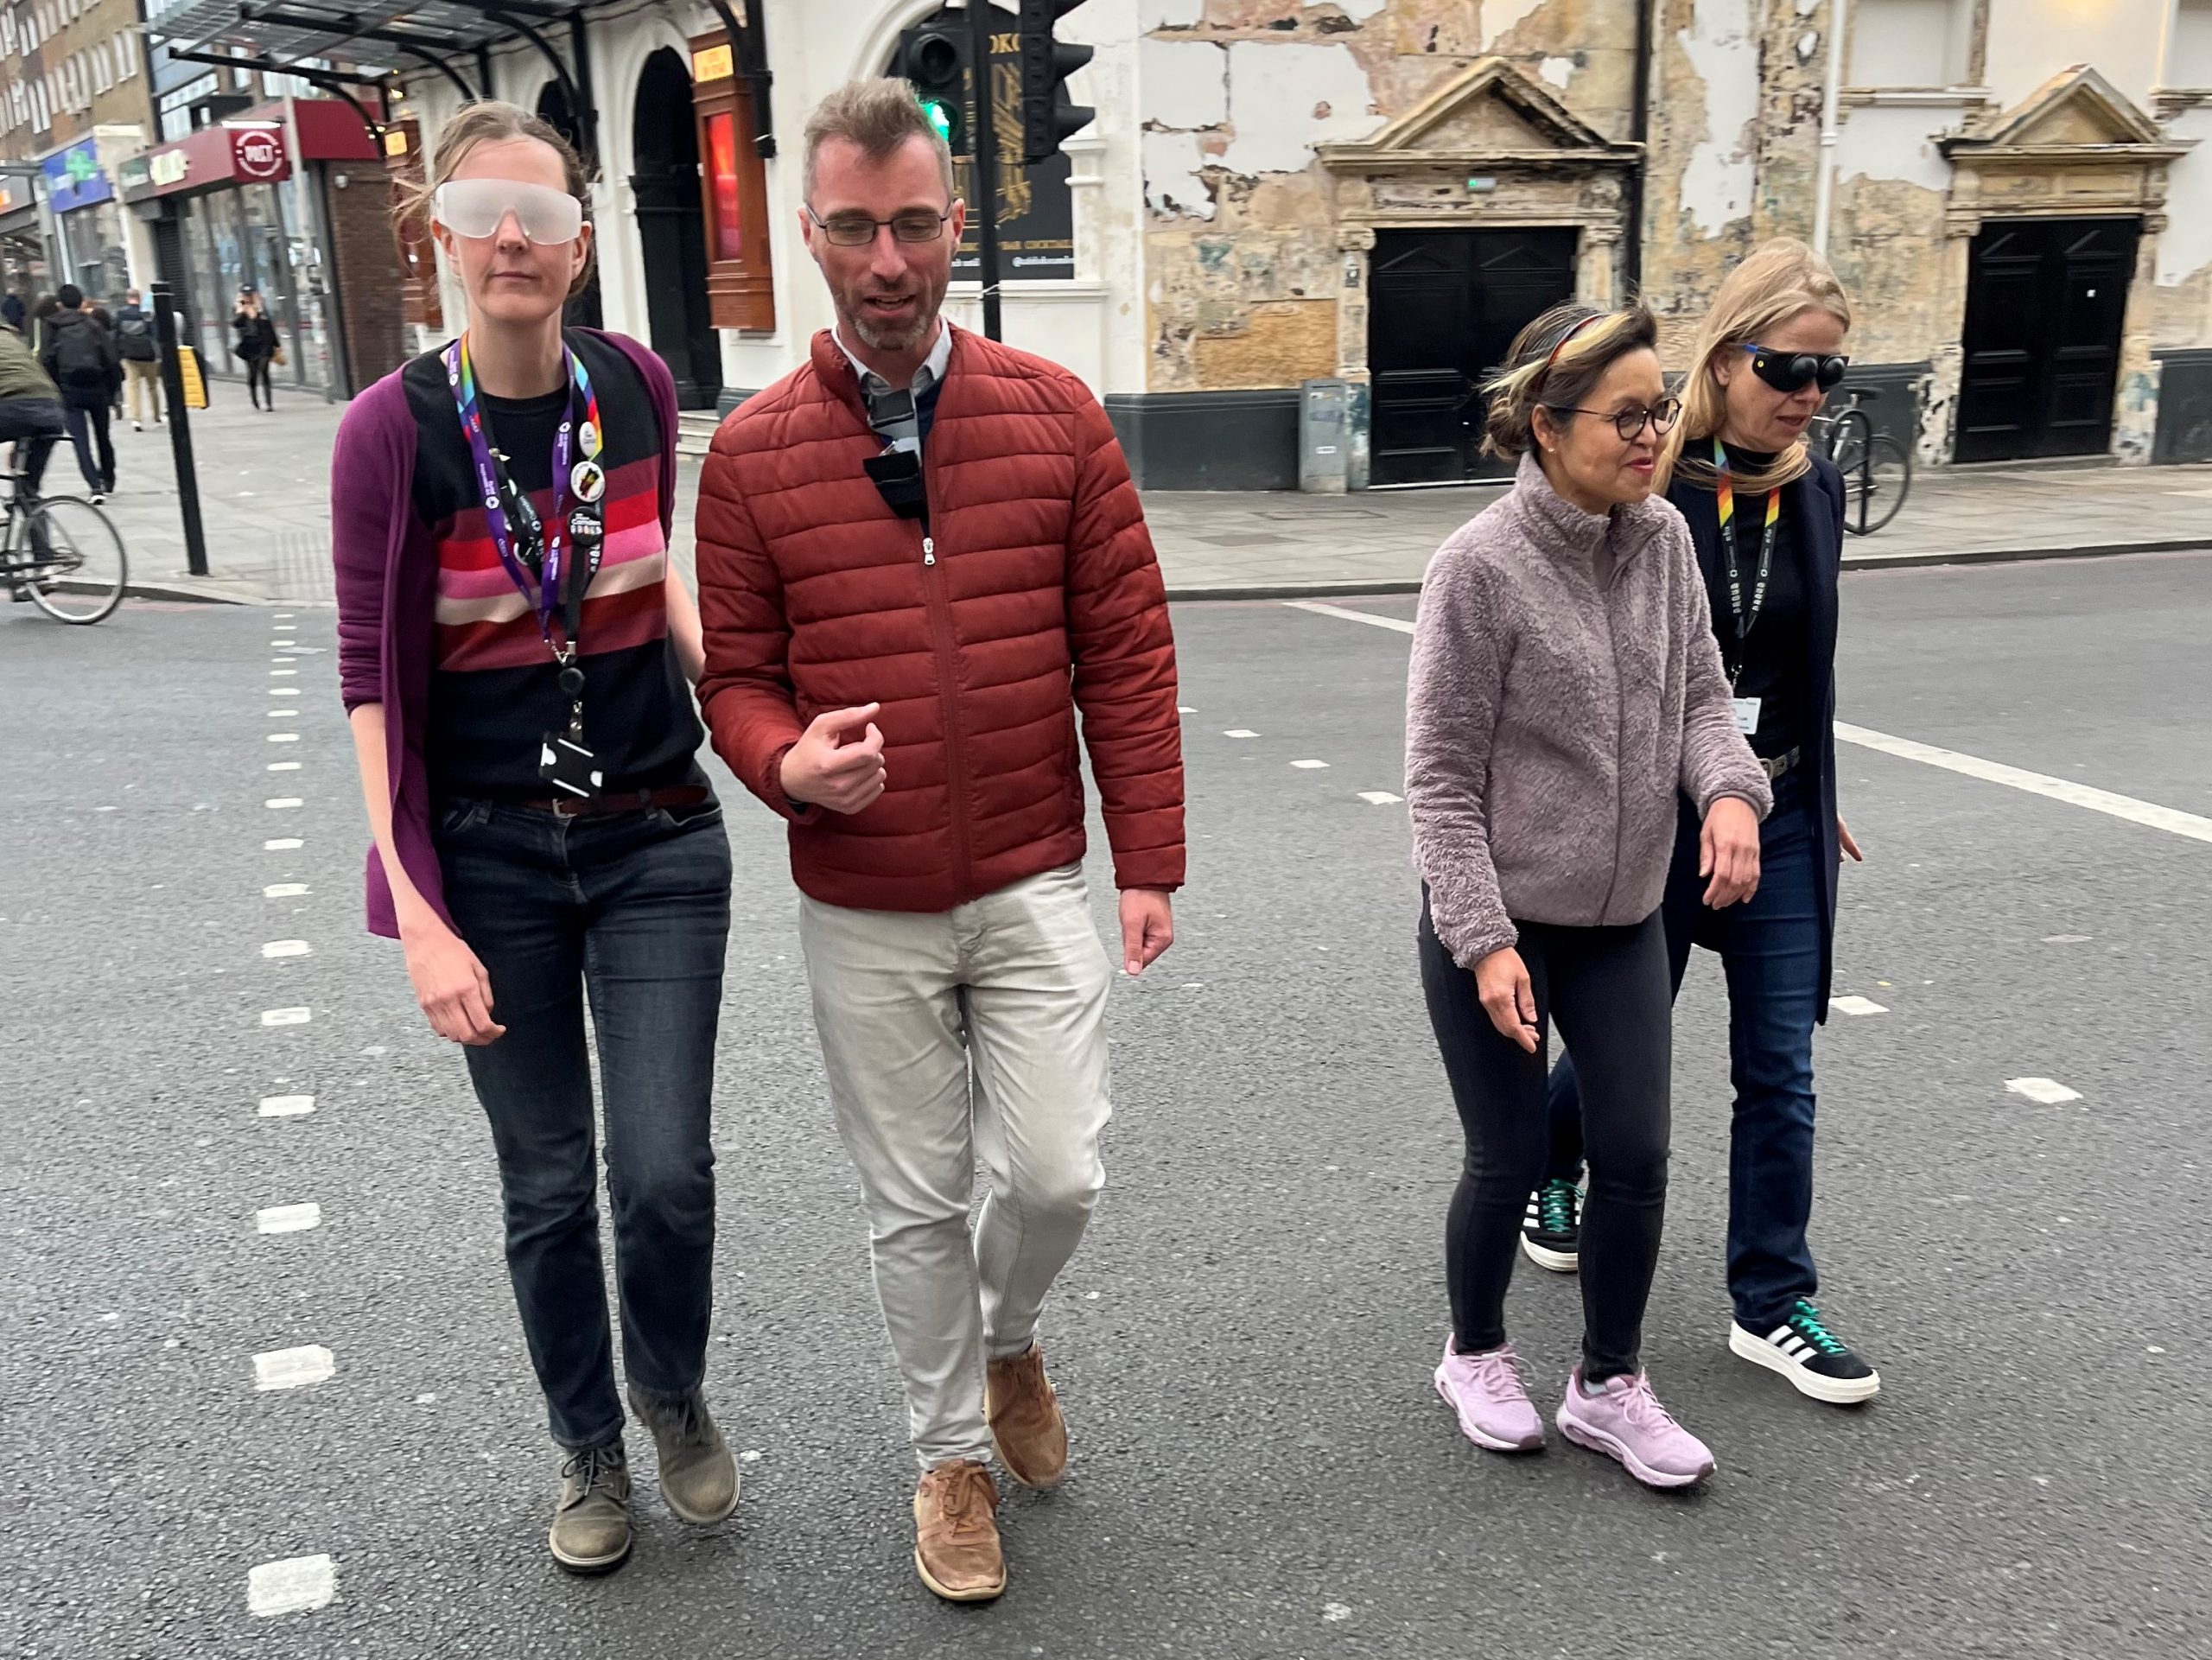 Camden Council councillors and cabinet members crossing a road during the sim spec walk at a pedestrian crossing. From left to right: Jenny Mulholland Camden Councillor (Gospel Oak ward), Adam Harrison, Cabinet member for a sustainable Camden and Camden Councillor (Bloomsbury ward), a My Sighted Guide Volunteer, and Sian Berry, Camden Councillor (Highgate Ward)